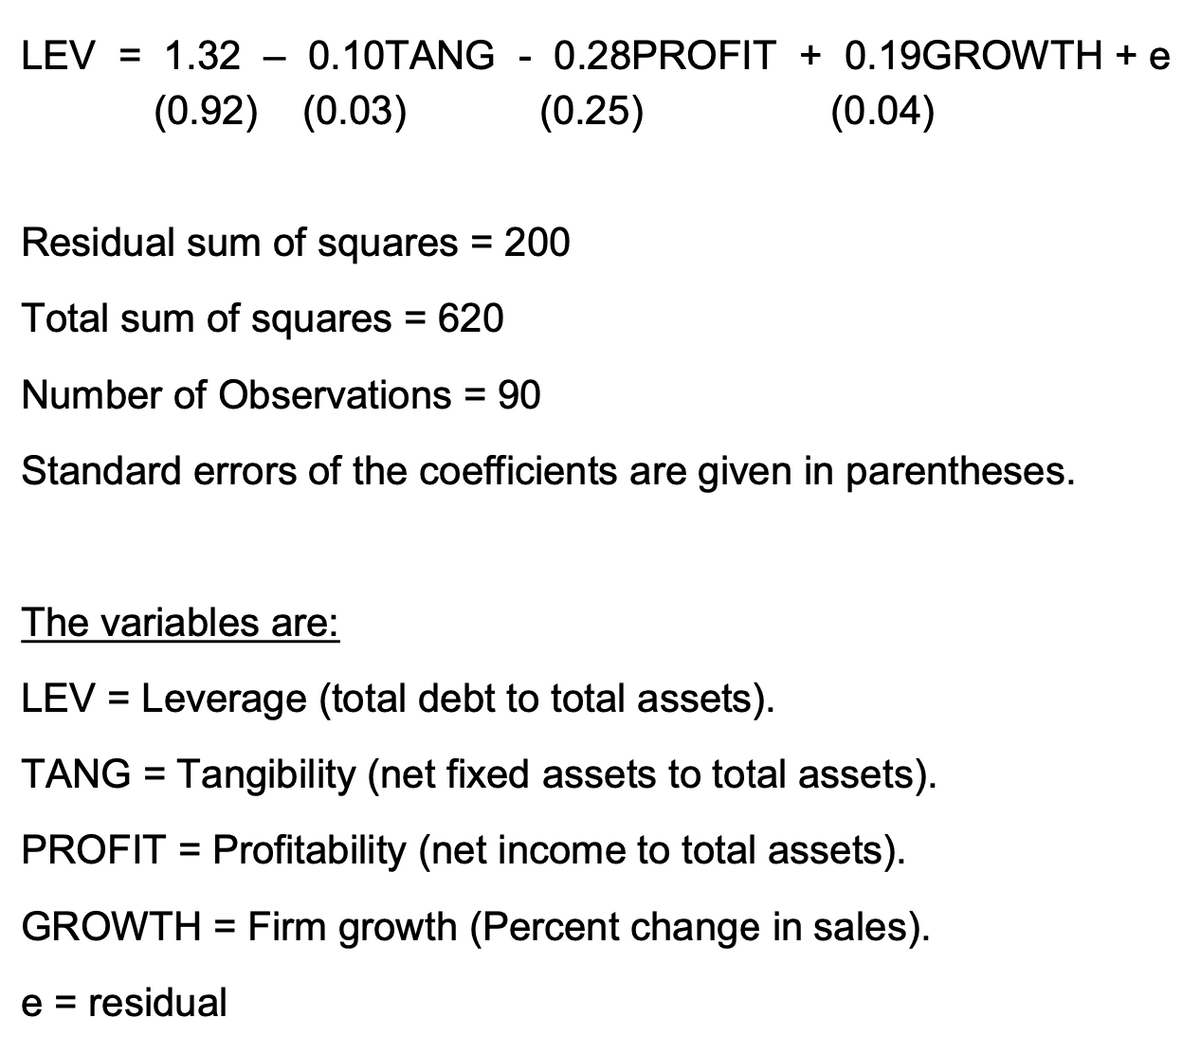 LEV = 1.32
0.10TANG
0.28PROFIT + 0.19GROWTH + e
(0.92) (0.03)
(0.25)
(0.04)
Residual sum of squares = 200
Total sum of squares = 620
Number of Observations = 90
Standard errors of the coefficients are given in parentheses.
The variables are:
LEV = Leverage (total debt to total assets).
TANG = Tangibility (net fixed assets to total assets).
PROFIT = Profitability (net income to total assets).
%3D
GROWTH = Firm growth (Percent change in sales).
e =
residual
